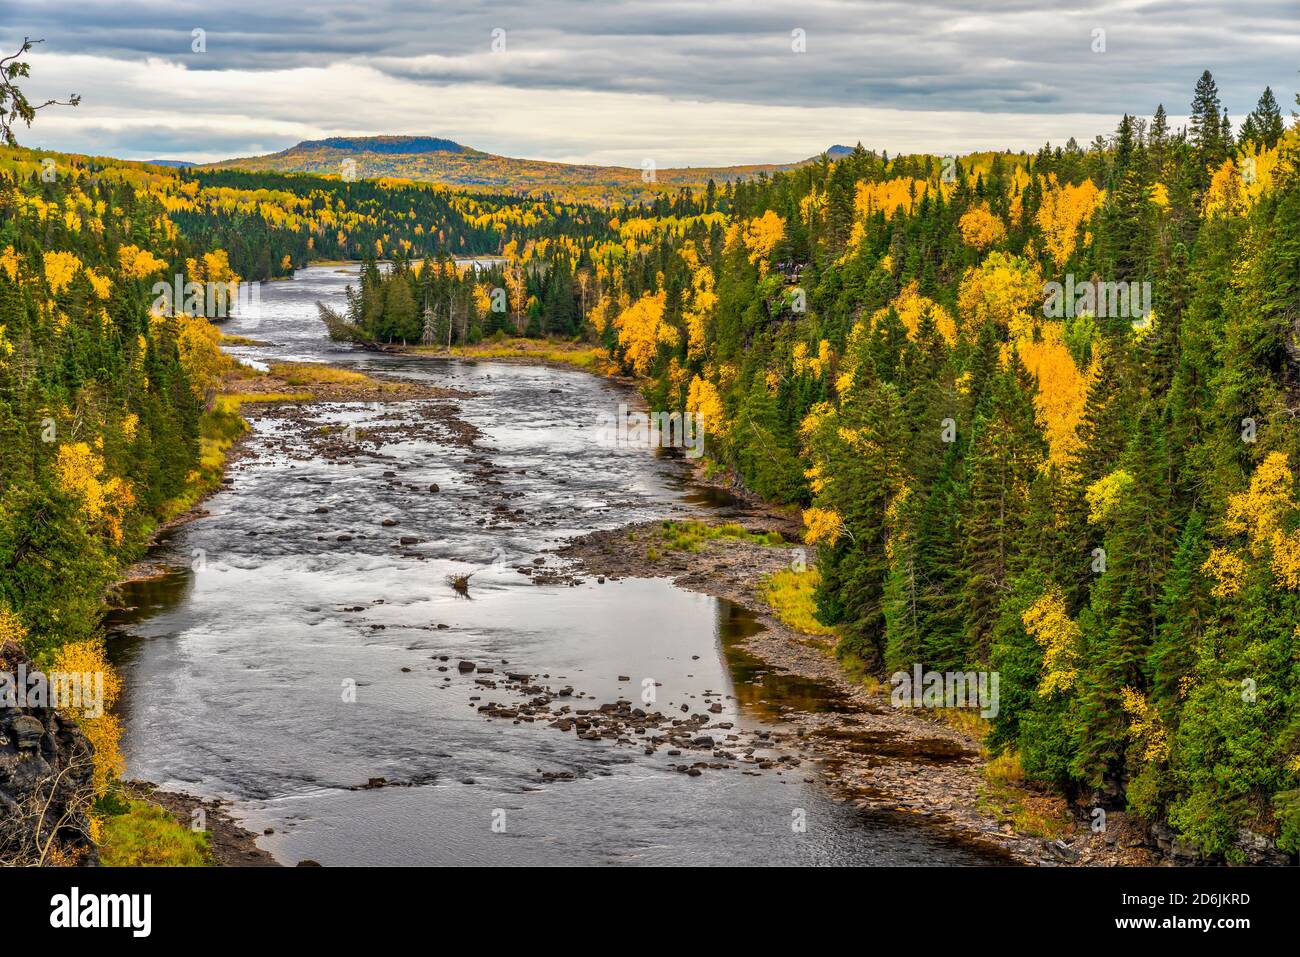 The gorge of the Kaministiquia River just downstream from the Kakabeka Falls with fall foliage color near Thunder Bay, Ontario, Canada. Stock Photo